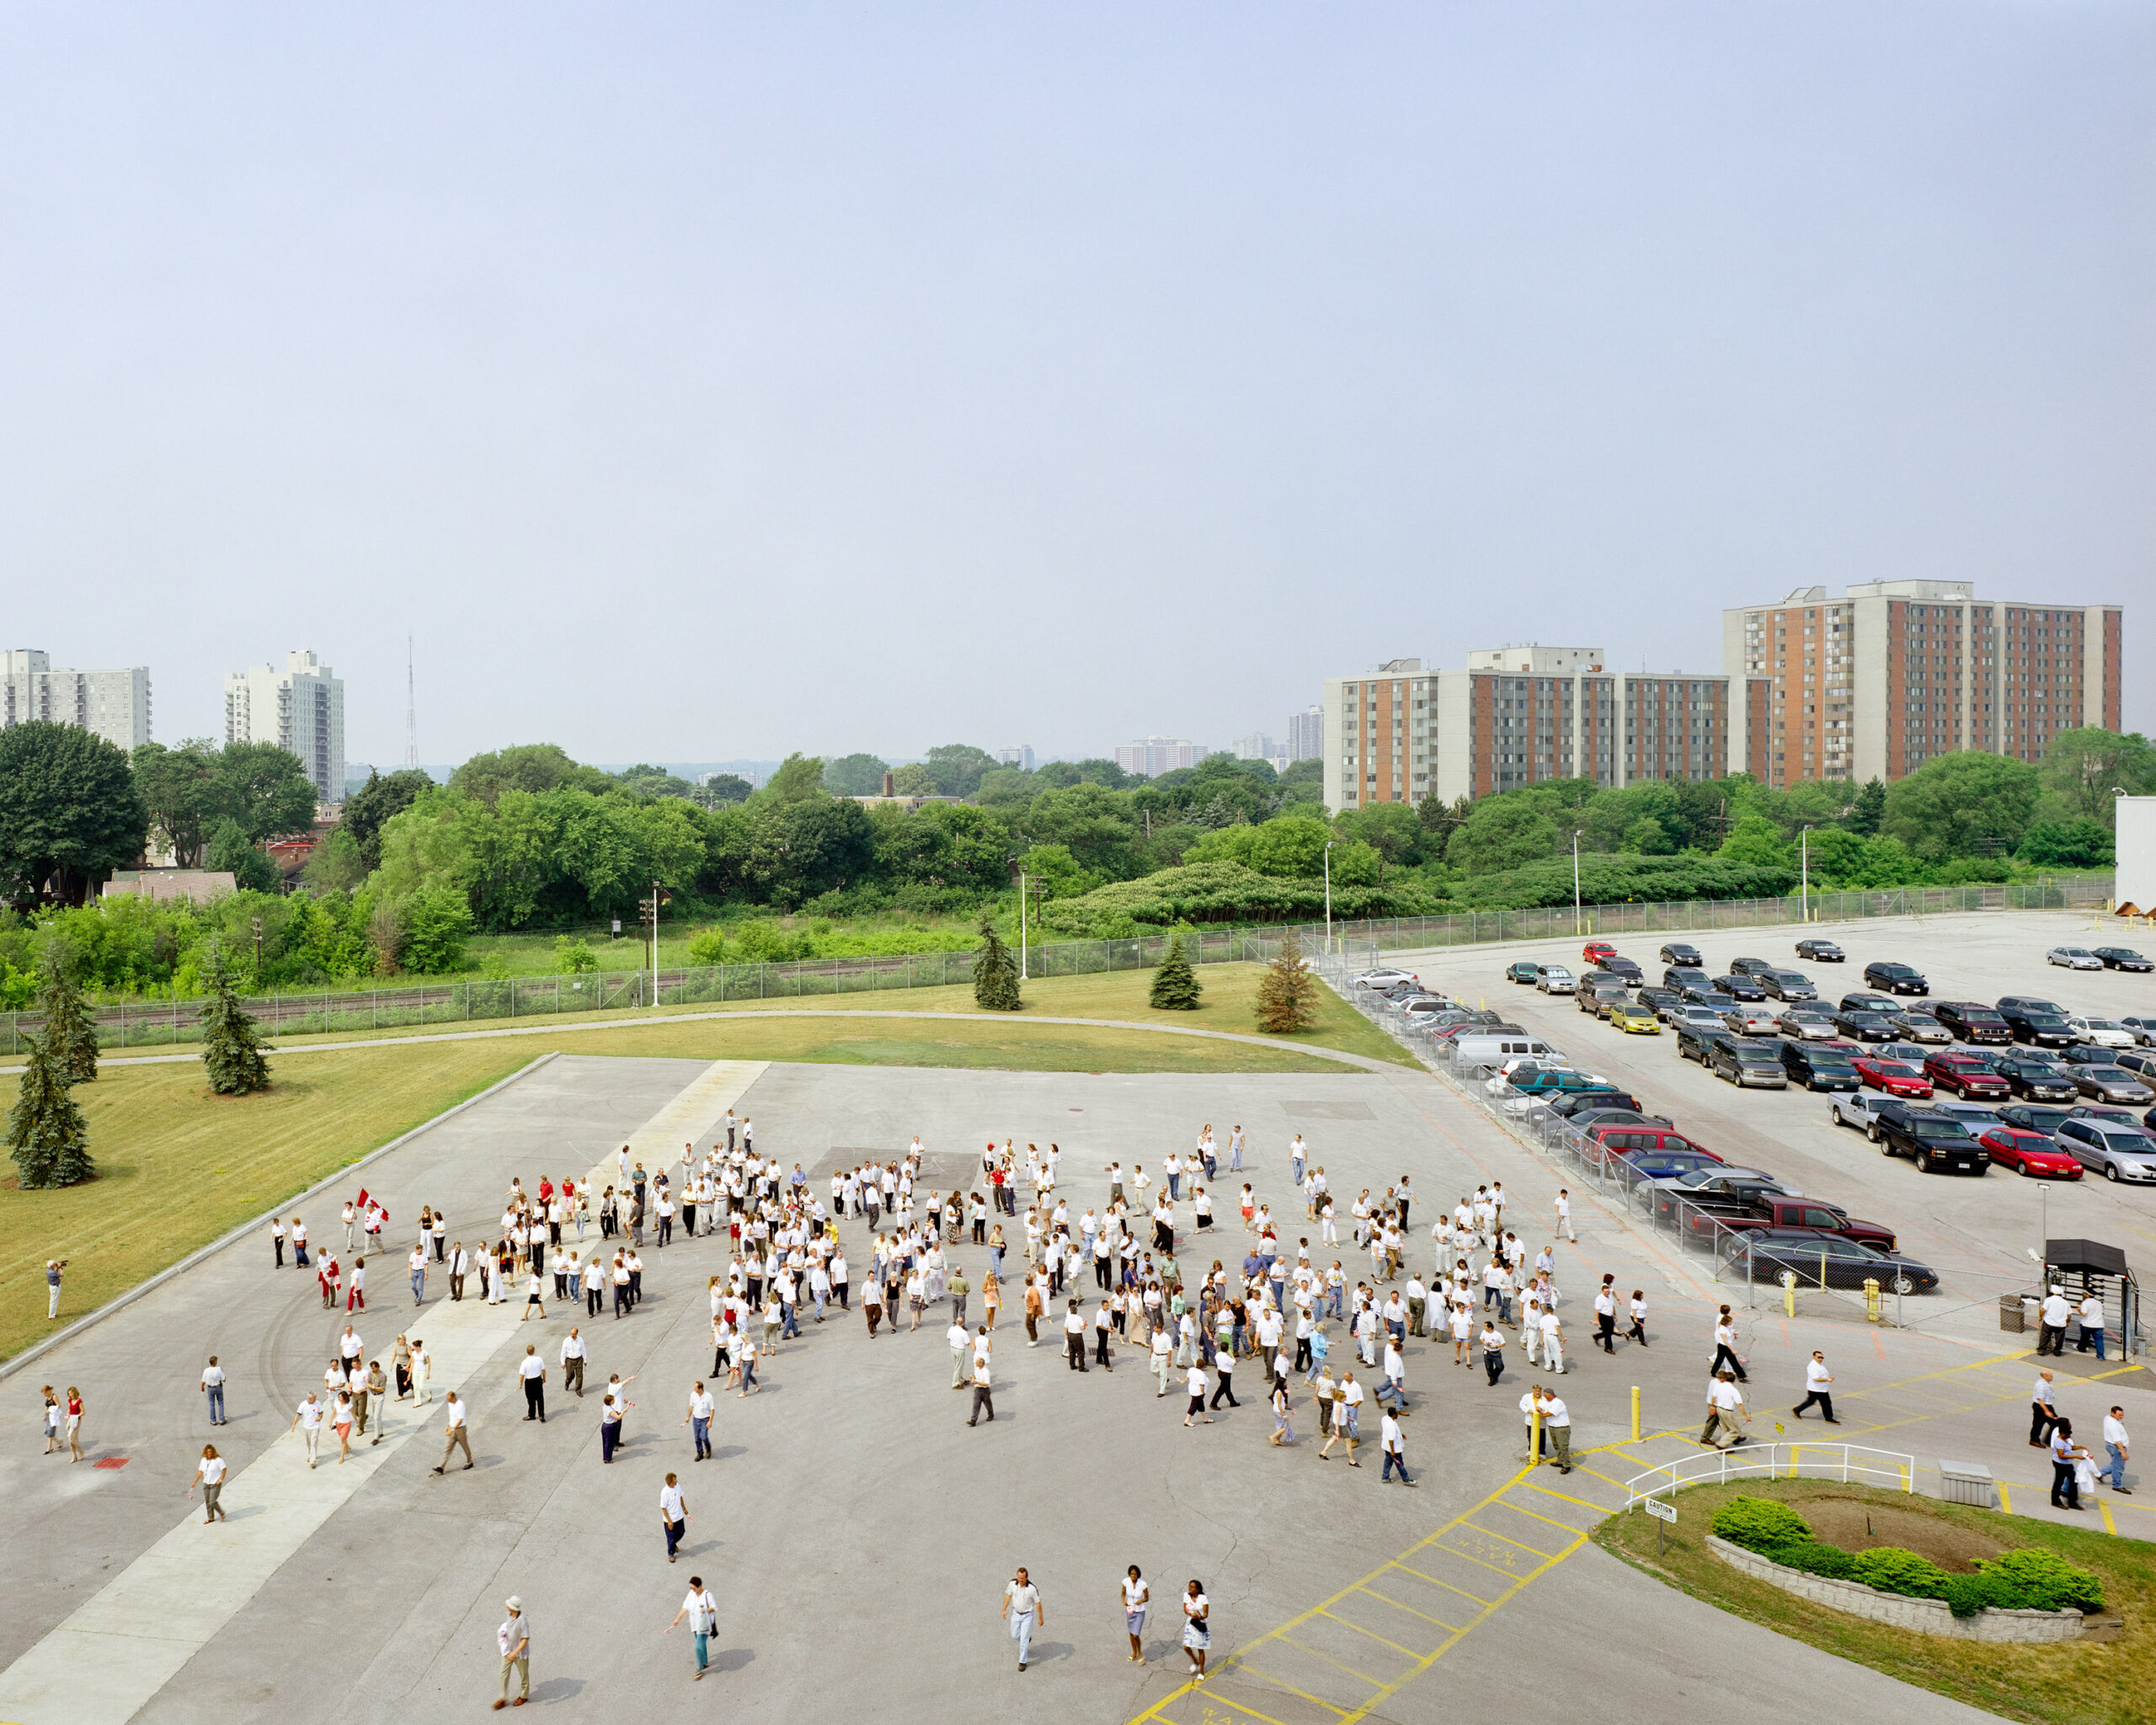     Robert Burley, End of Employee Meeting, West Parking Lot, Last Day of Manufacturing Operations, Kodak Canada, Toronto June 29, 2005, Courtesy of the artist and Stephen Bulger Gallery

